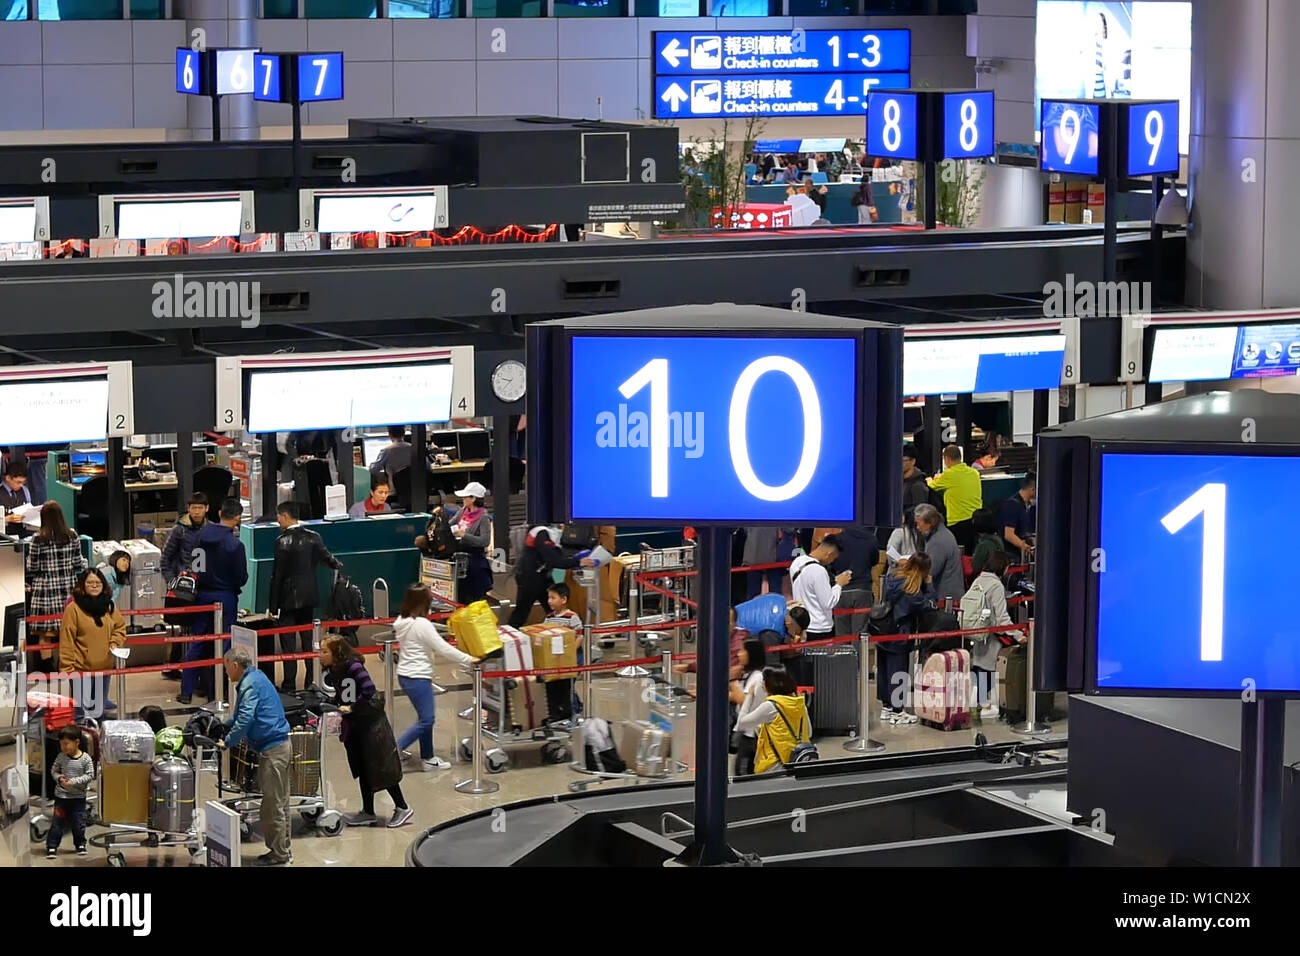 Top shot of passengers going to the check in desks inside Taiwan airport Stock Photo